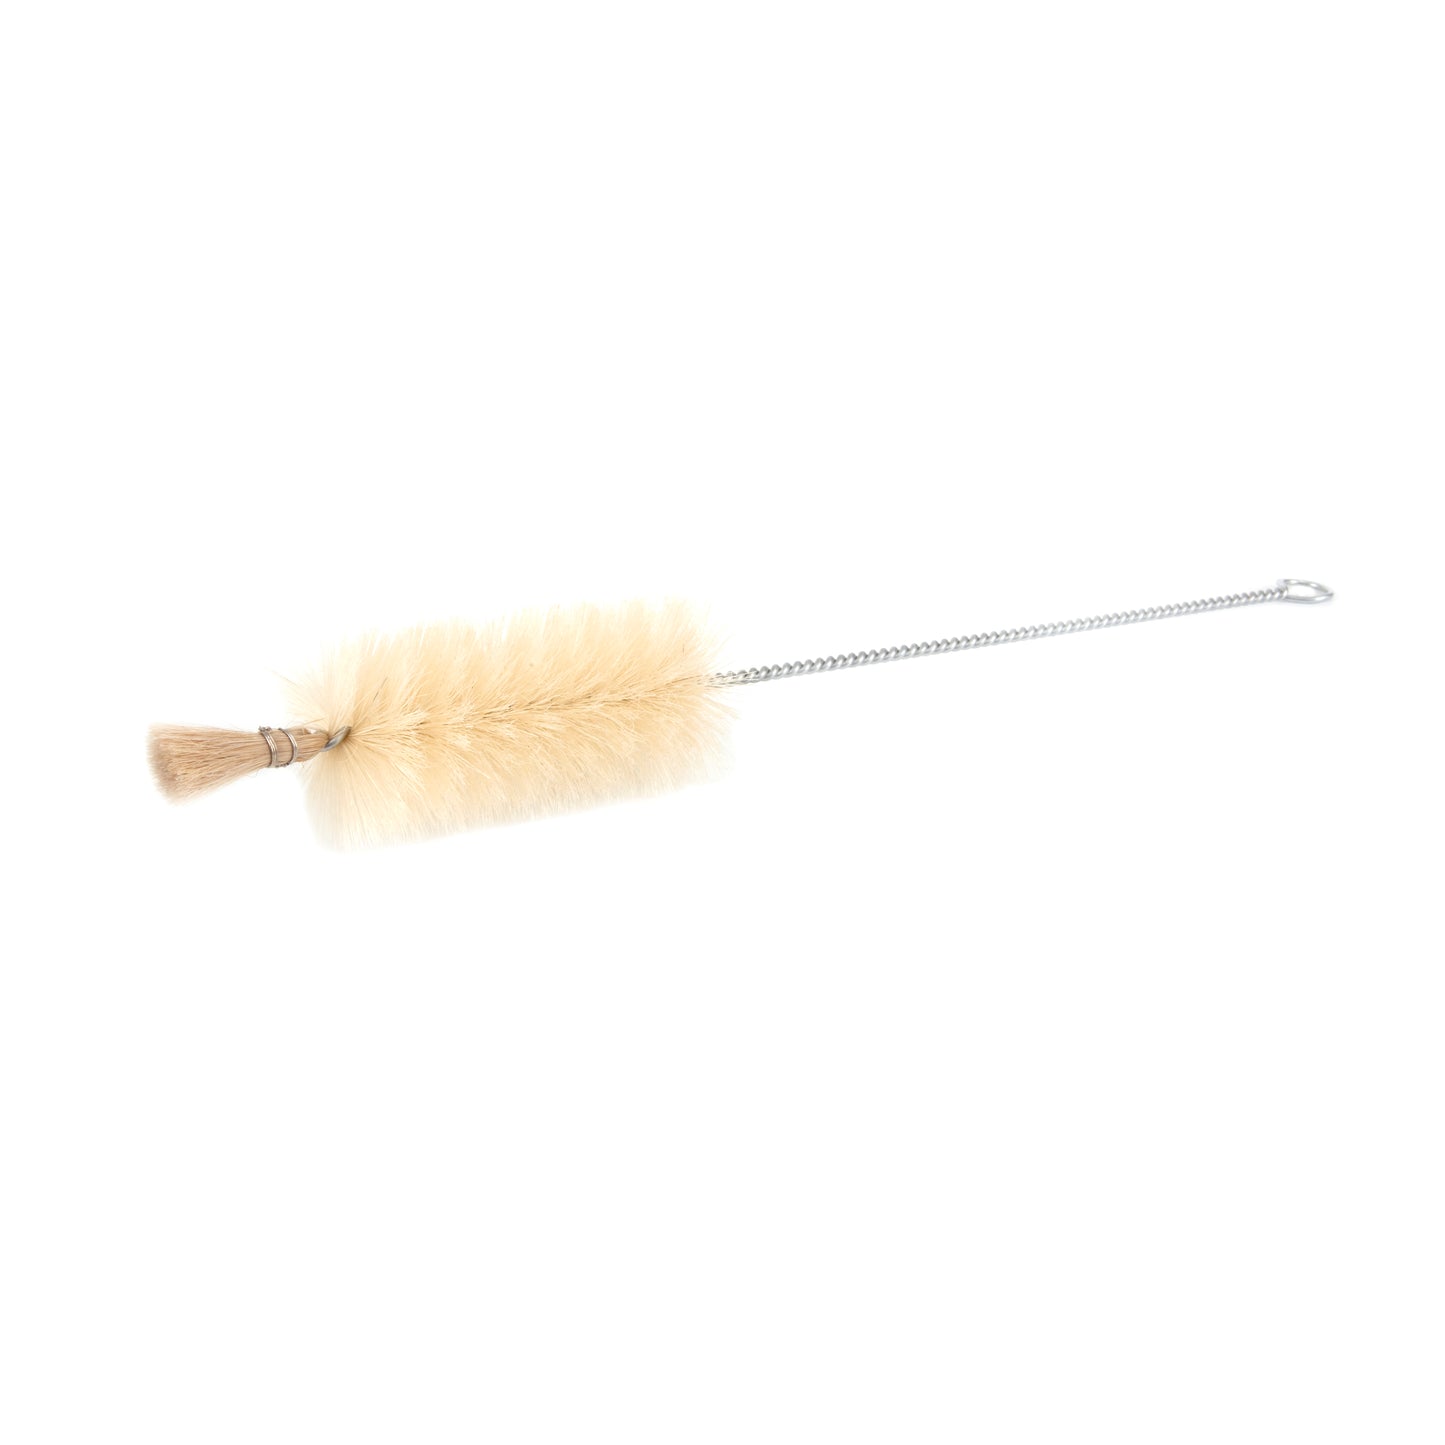 18.5-inch long bottle cleaning brush with bristle tip and hanging loop 